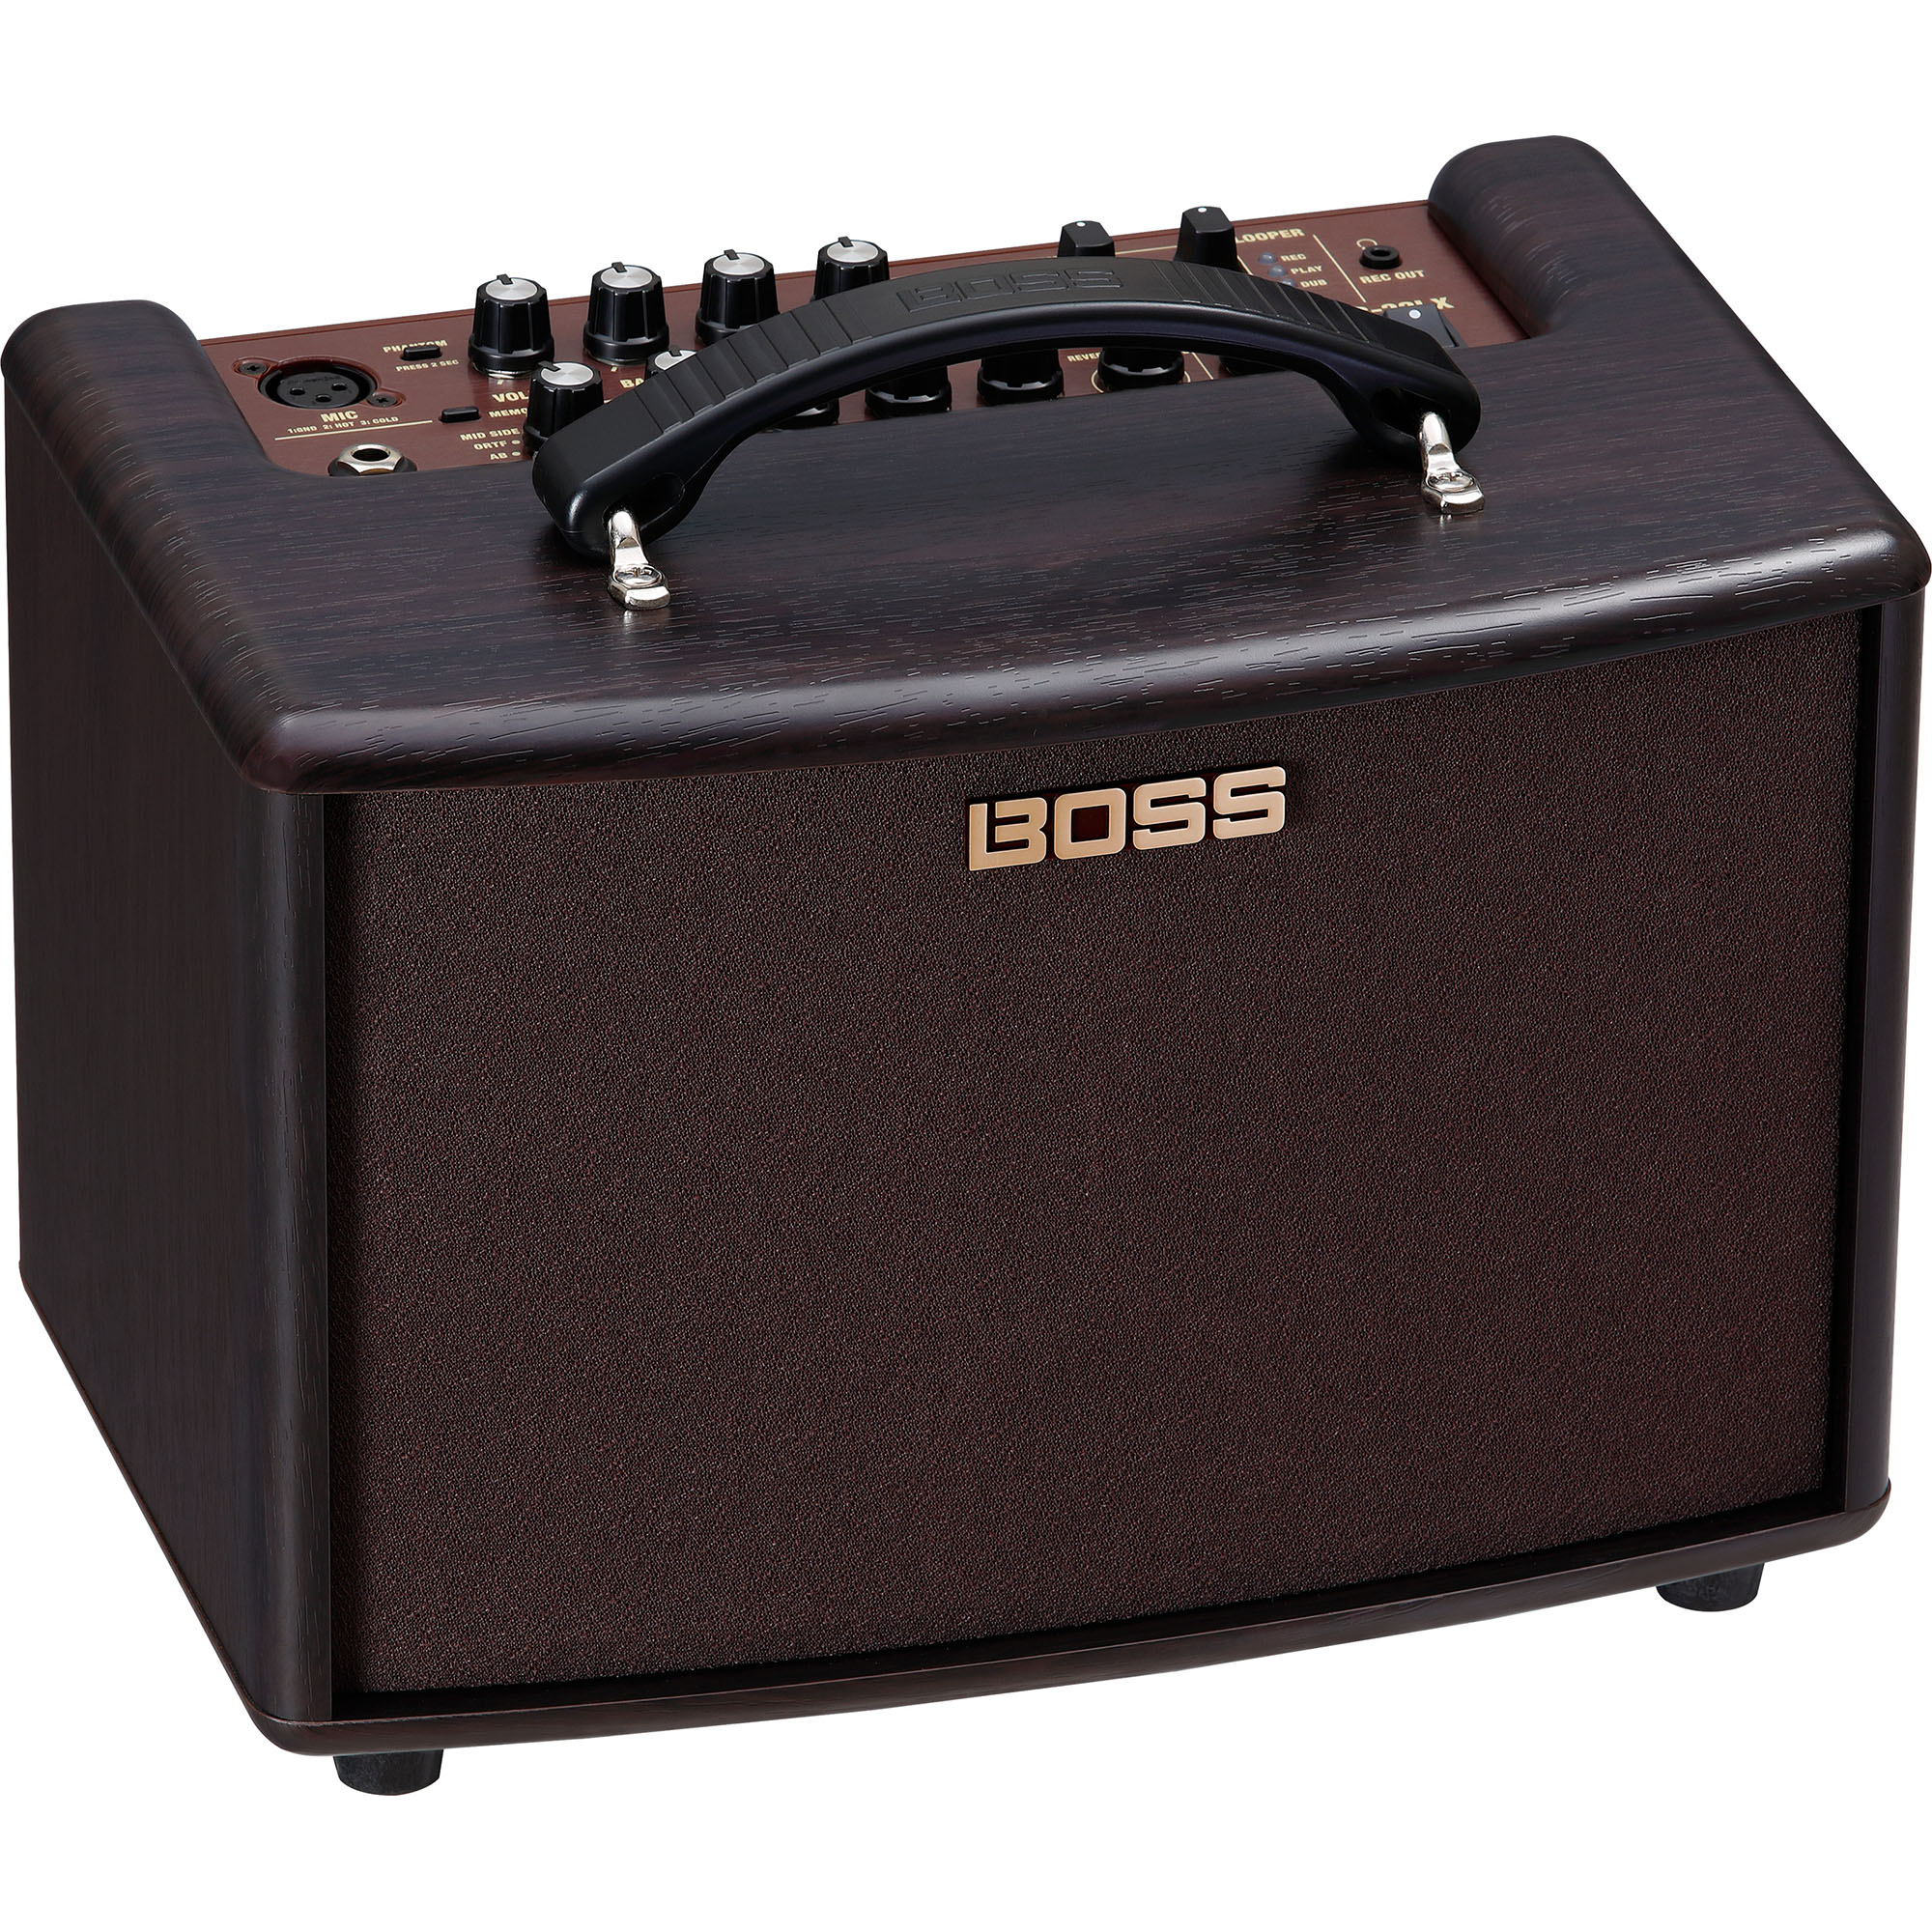 Boss Ac22 Lx Acoustic Combo 10w 1x8 - Acoustic guitar combo amp - Variation 3